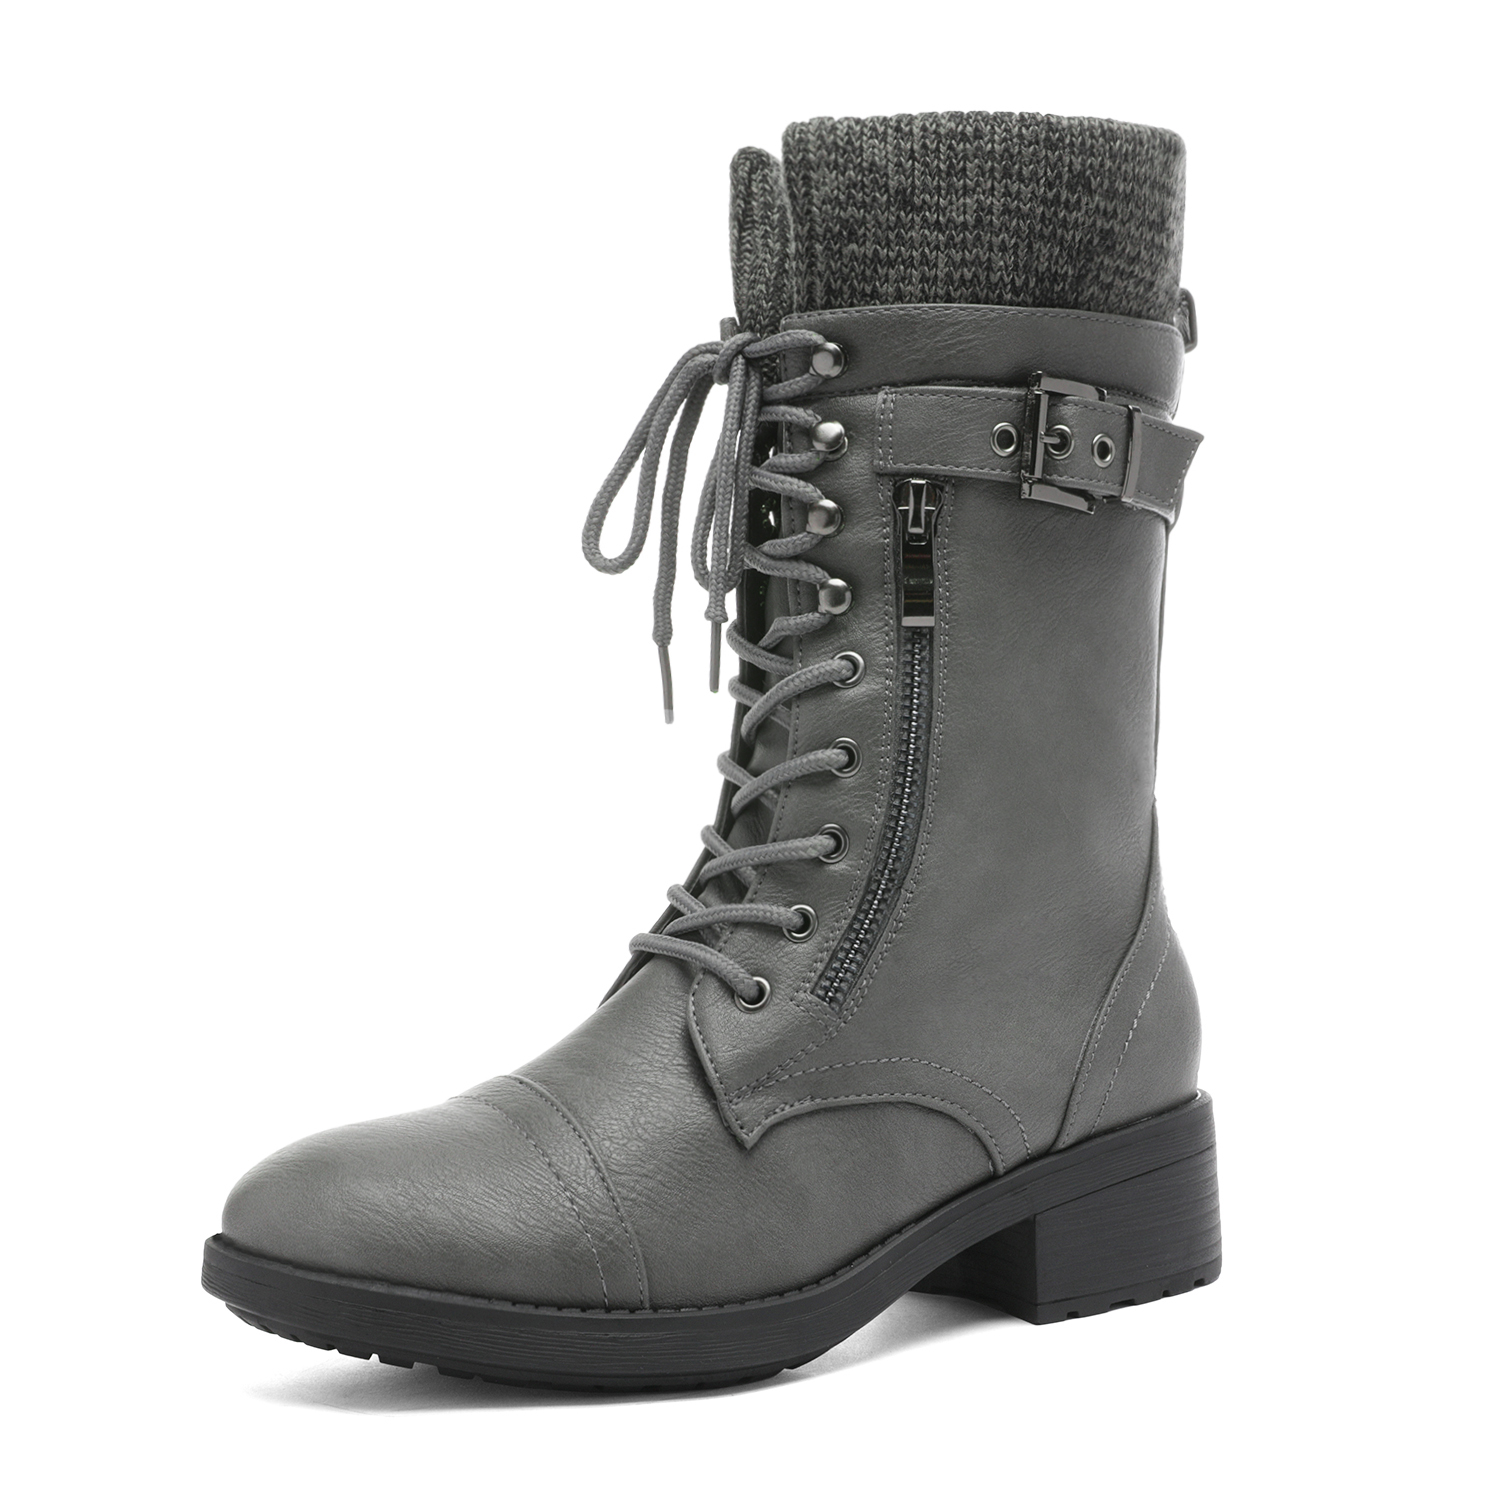 DREAM PAIRS Women's Ankle Bootie Winter Lace up Mid Calf Military Combat Boots 